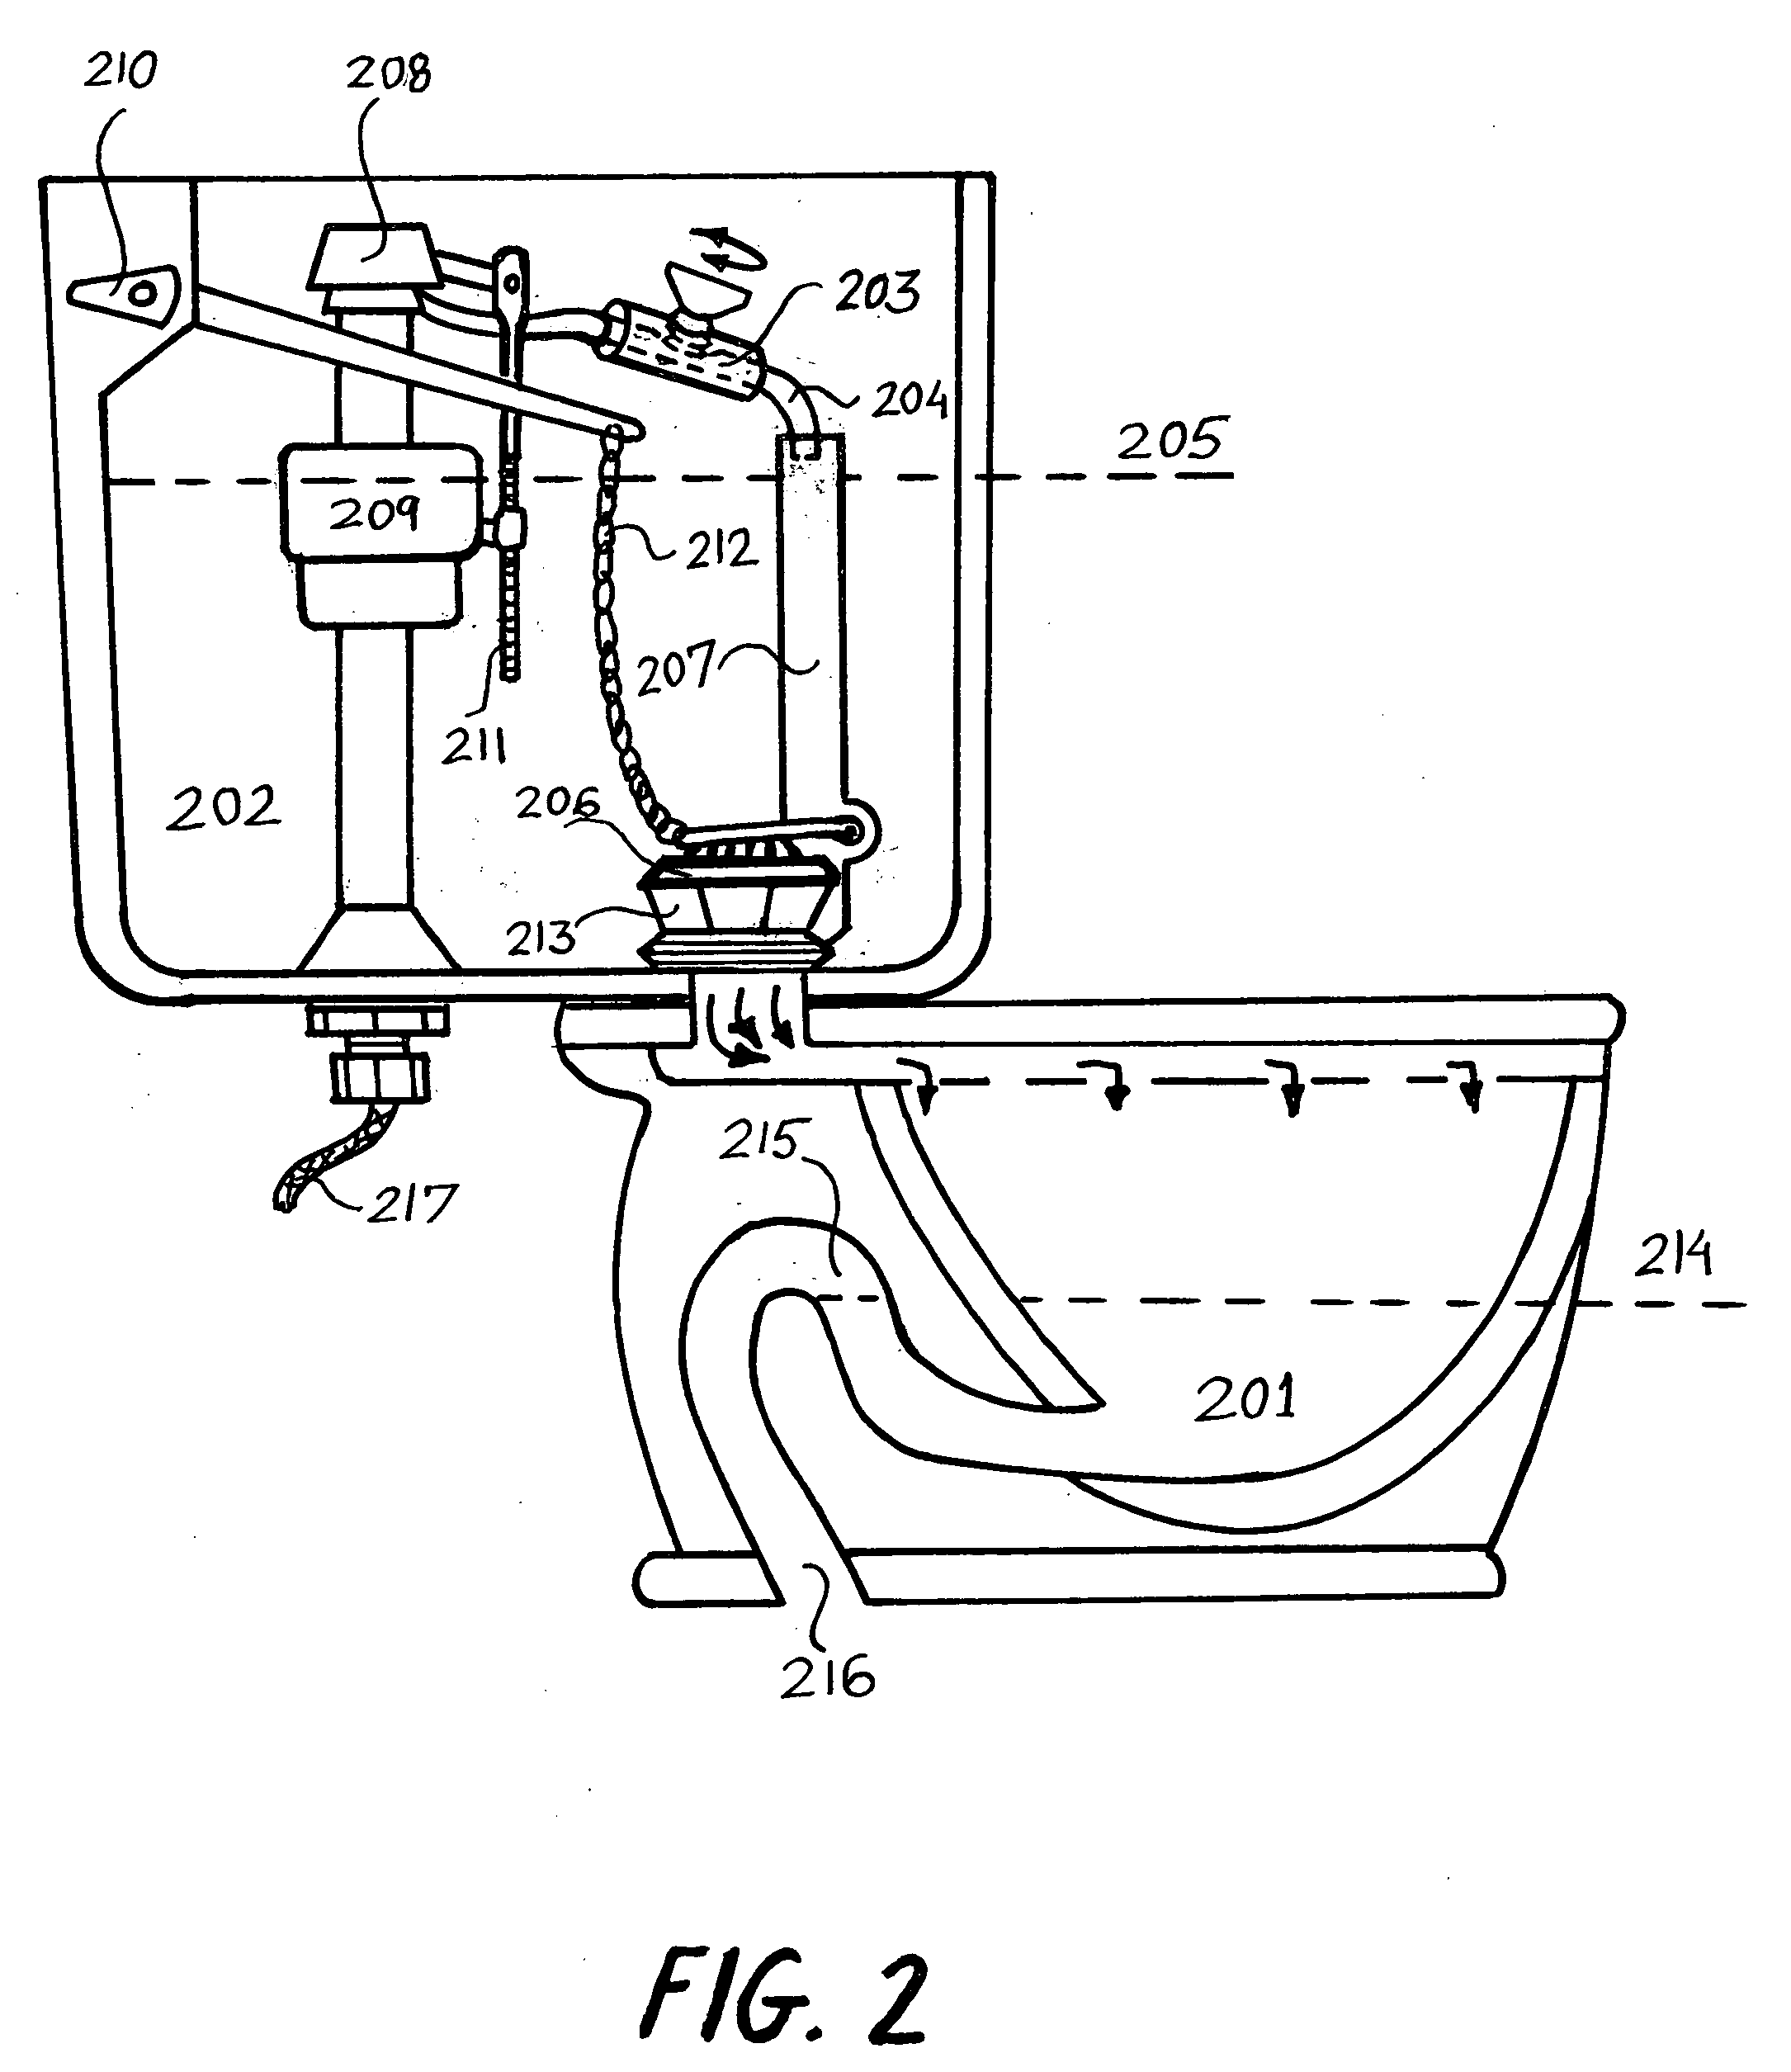 Apparatus and method to control and adjust water consumption by a toilet during refill of the bowl and reservior